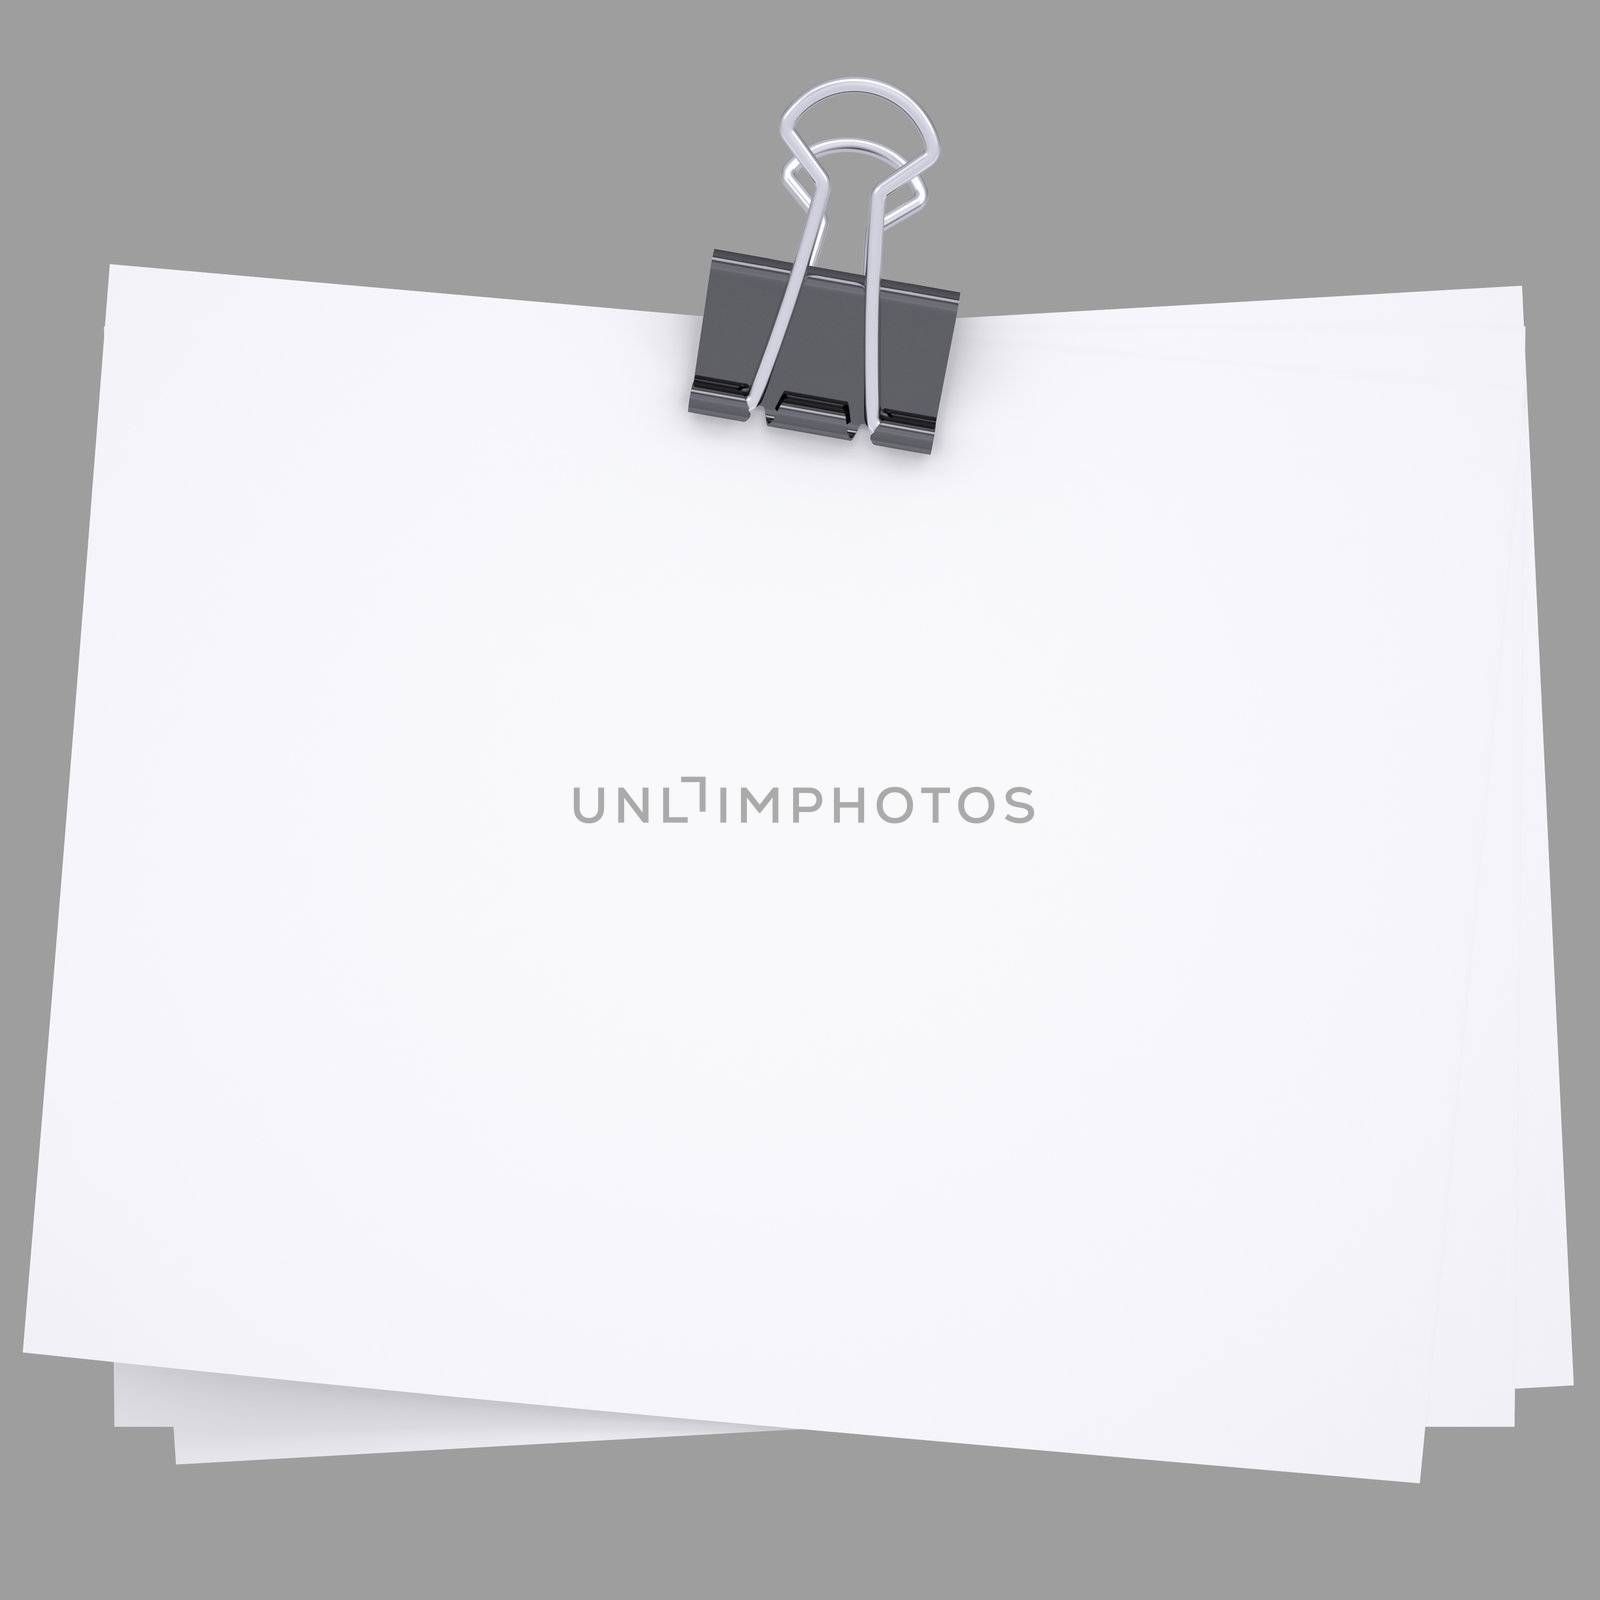 Paper with Binder. Isolated render on a white background